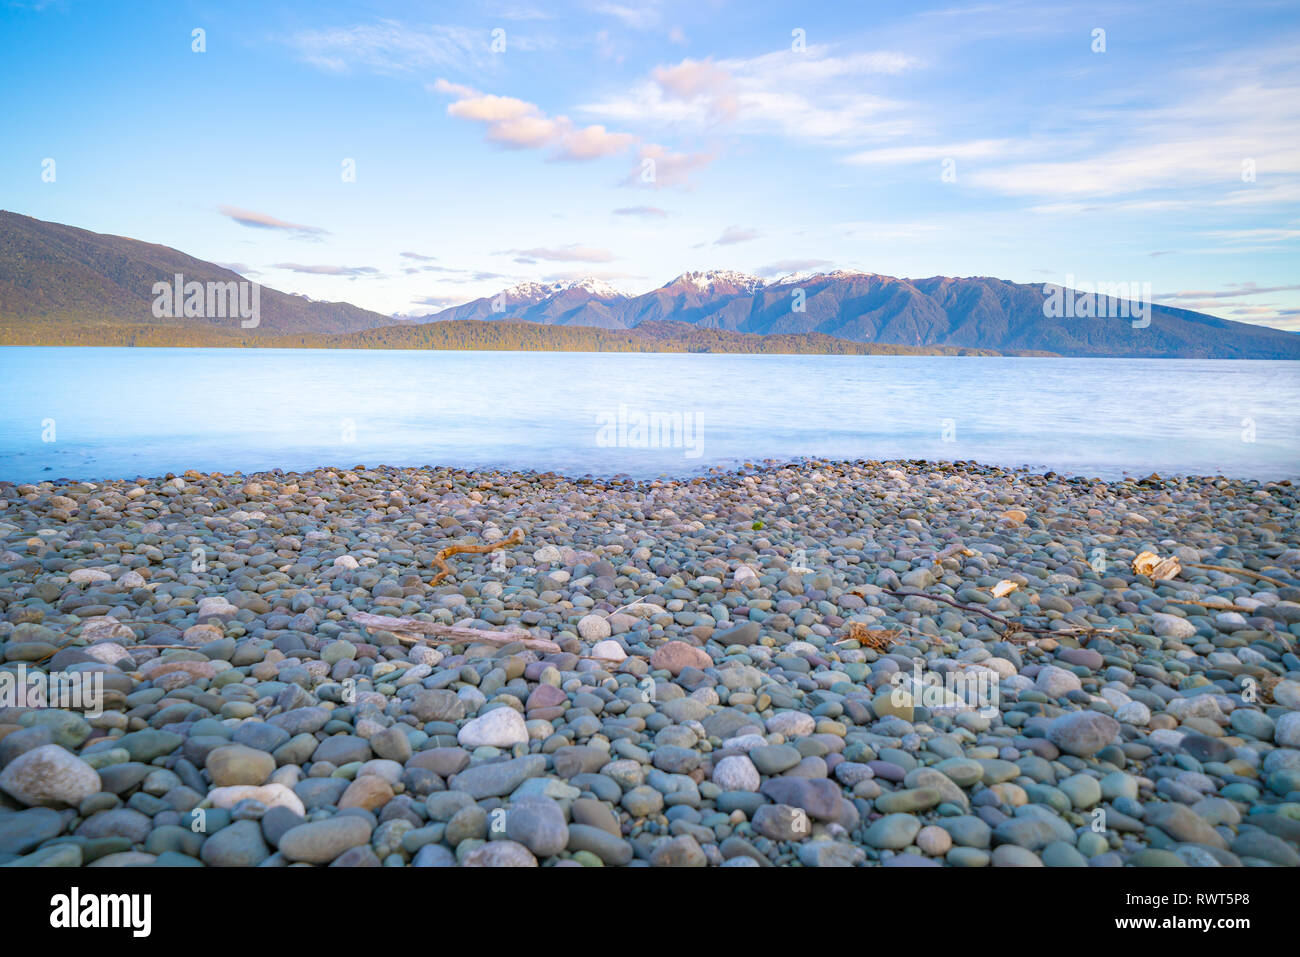 Lake Te Anau looking along the length to Murchison Mountain Range from shore across turquoise blue water. Stock Photo